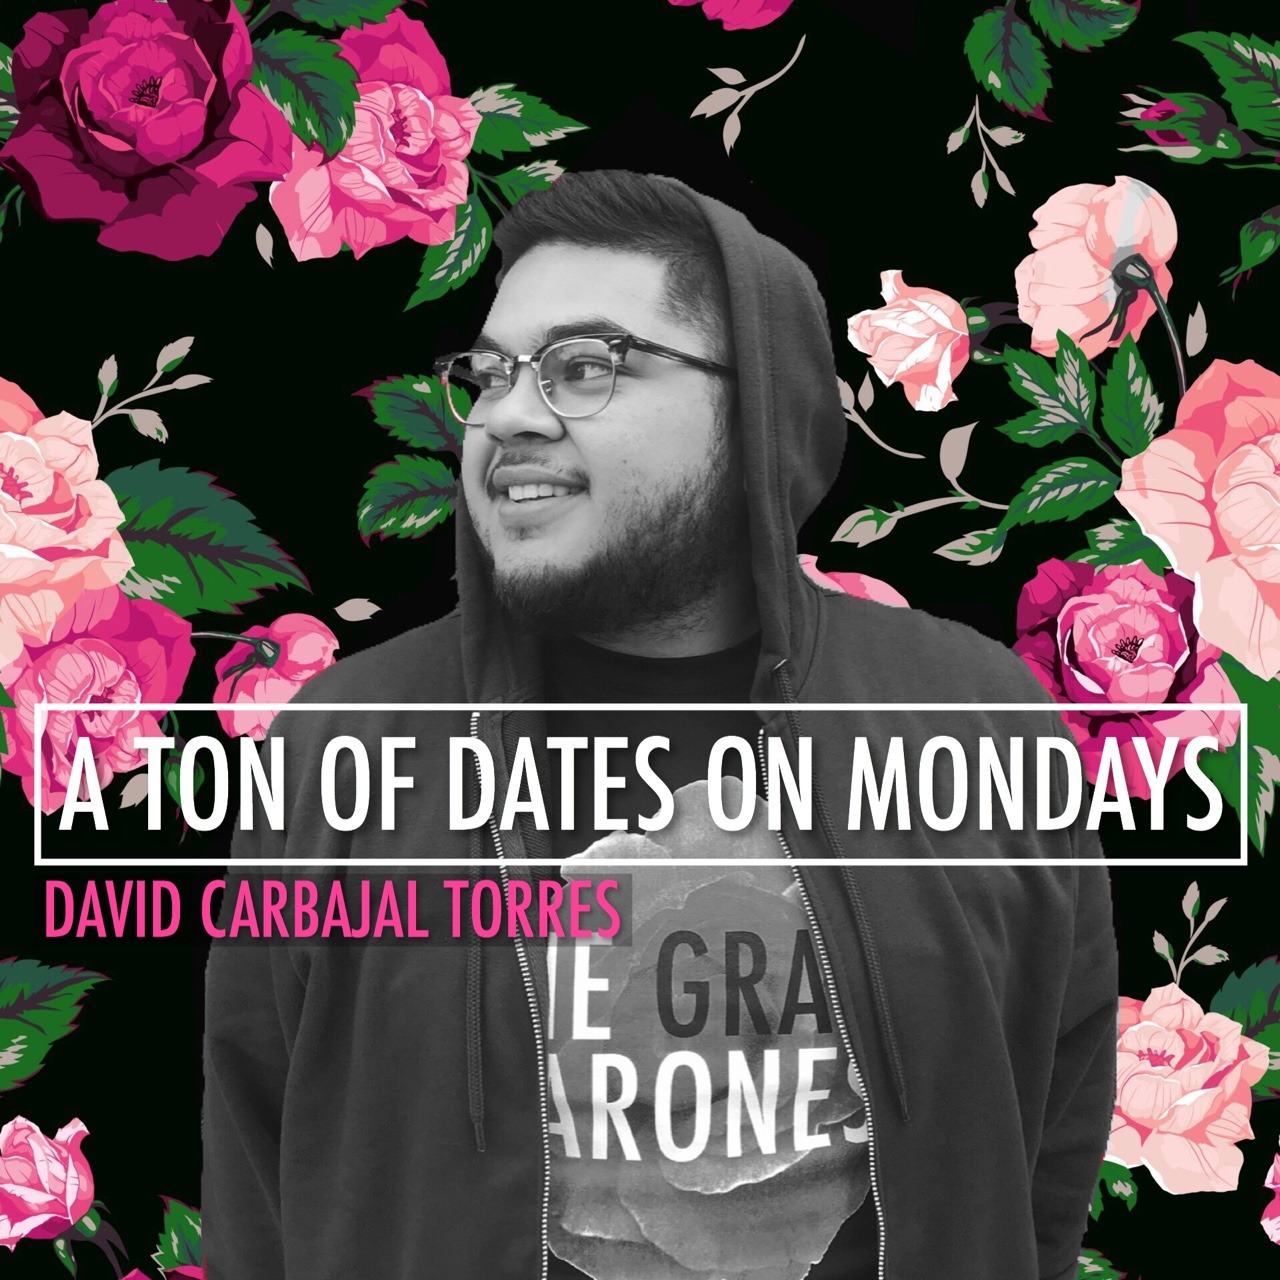 I was supposed to go on a date on Monday with a conventionally attractive thinner guy that didn’t end up happening. I don’t usually share these things for obvious reasons but mainly because there is this prominent notion that fat people don’t date or...